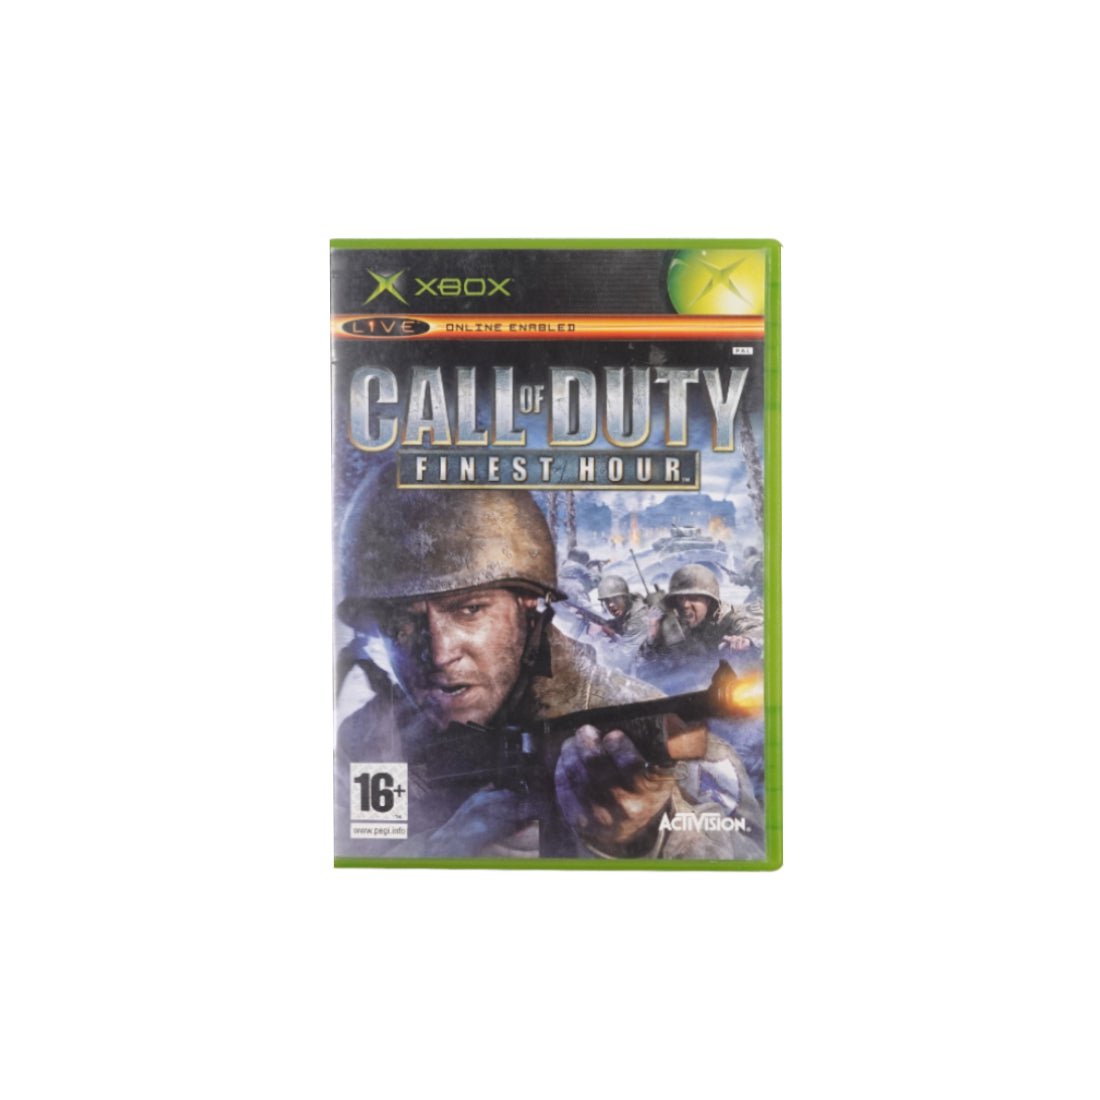 (Pre-Owned) Call of Duty: Finest Hour - Xbox - Store 974 | ستور ٩٧٤